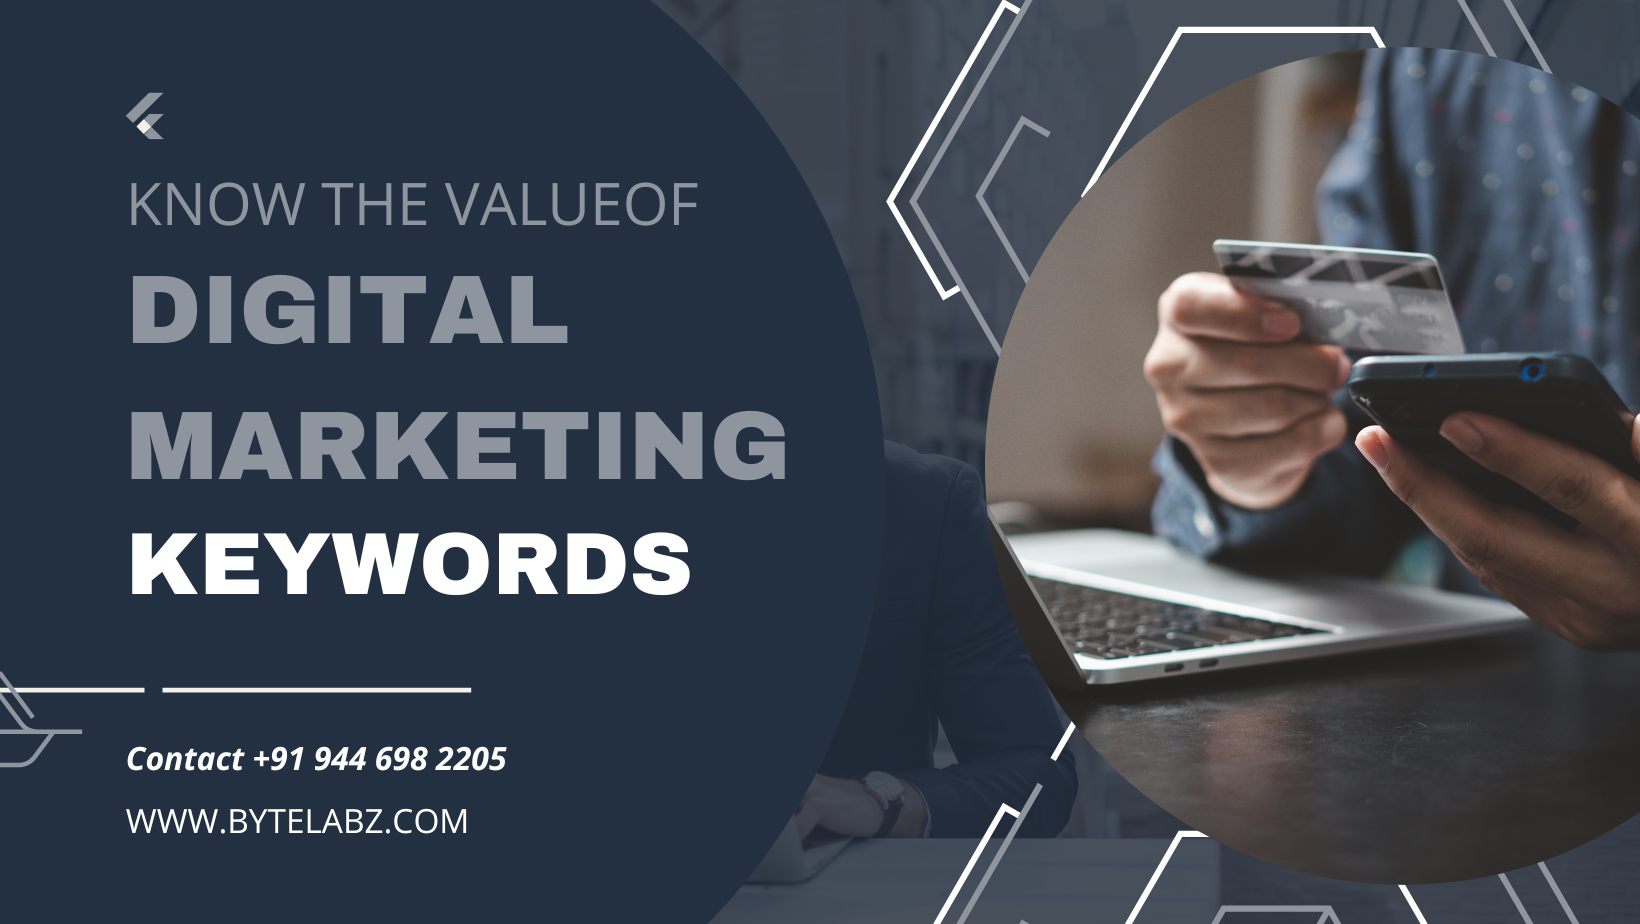 Knowing the Value of Keywords in Digital Marketing